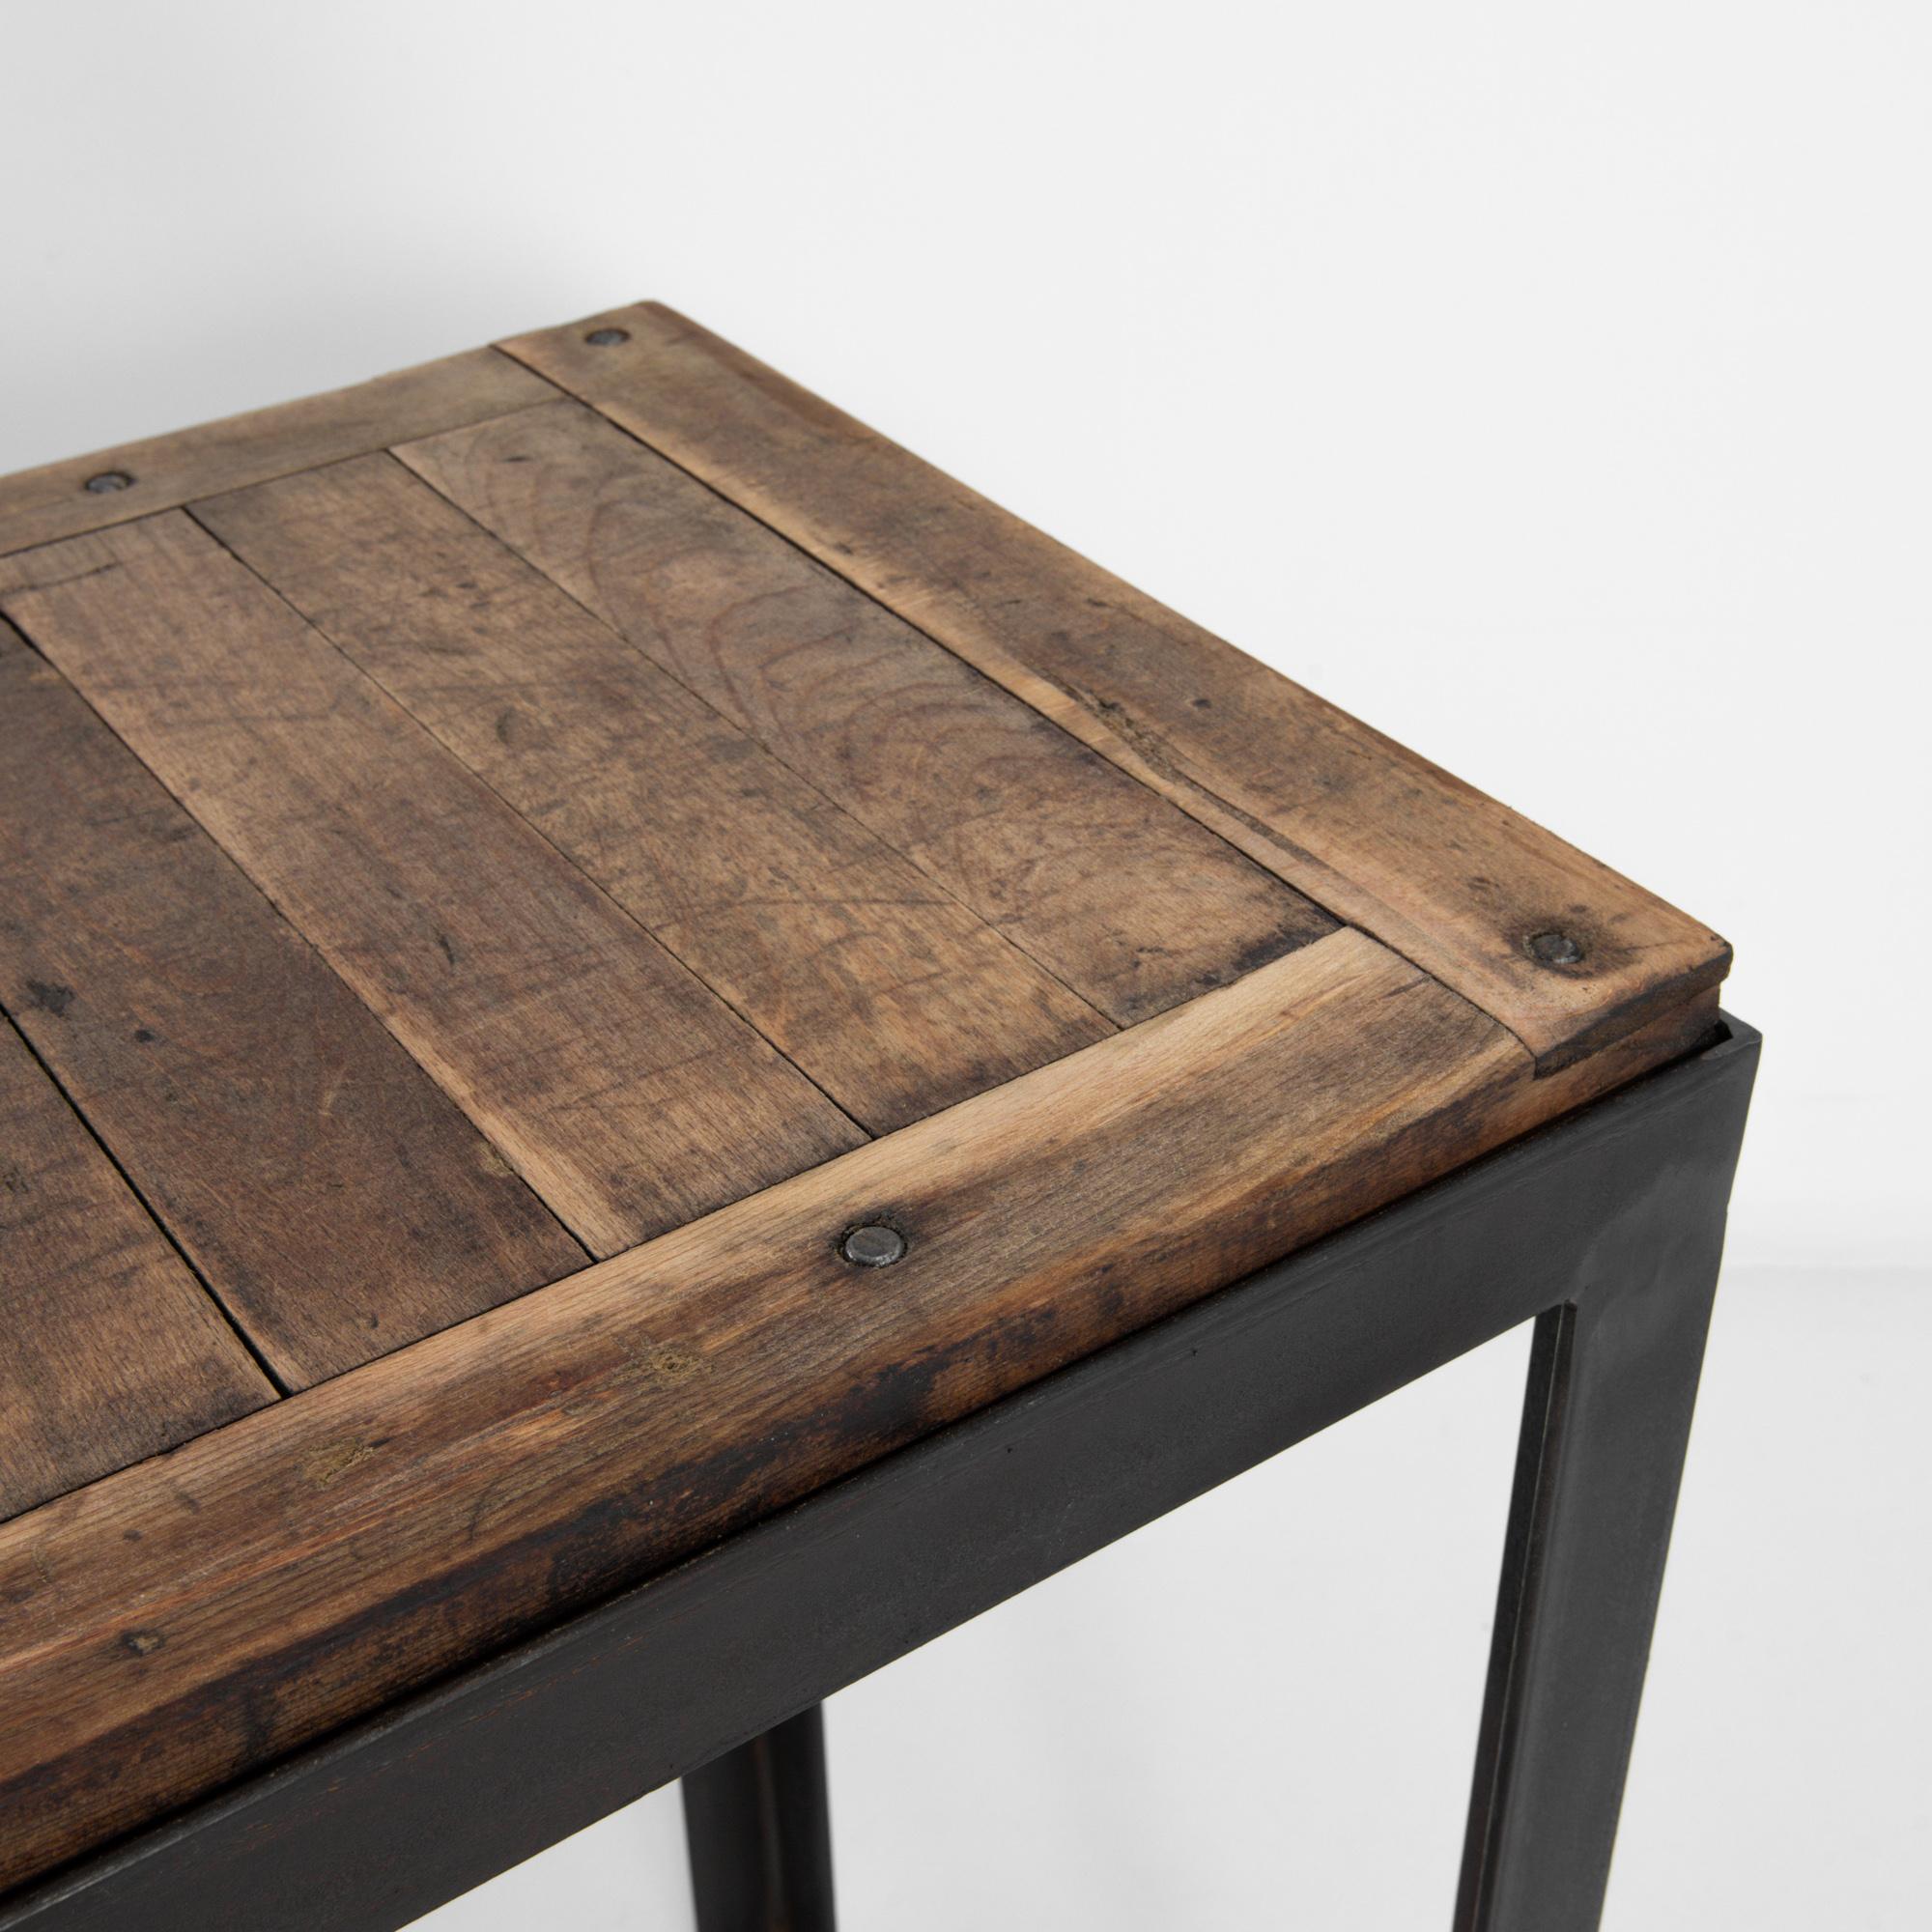 20th Century European Minimalist Table with Wooden Table Top 1